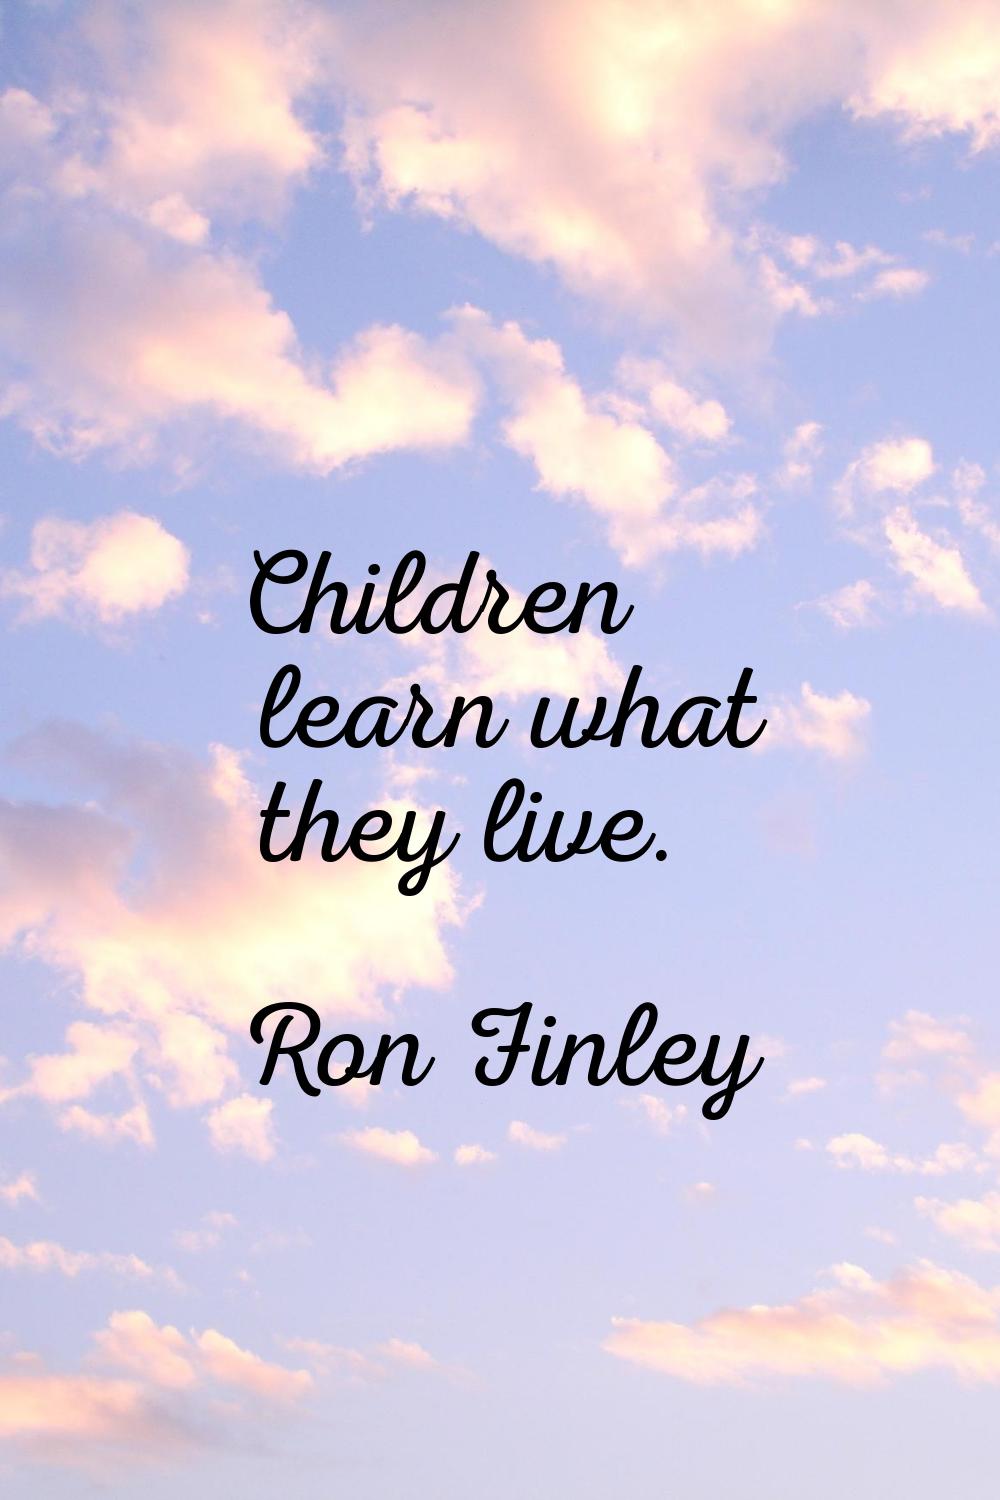 Children learn what they live.